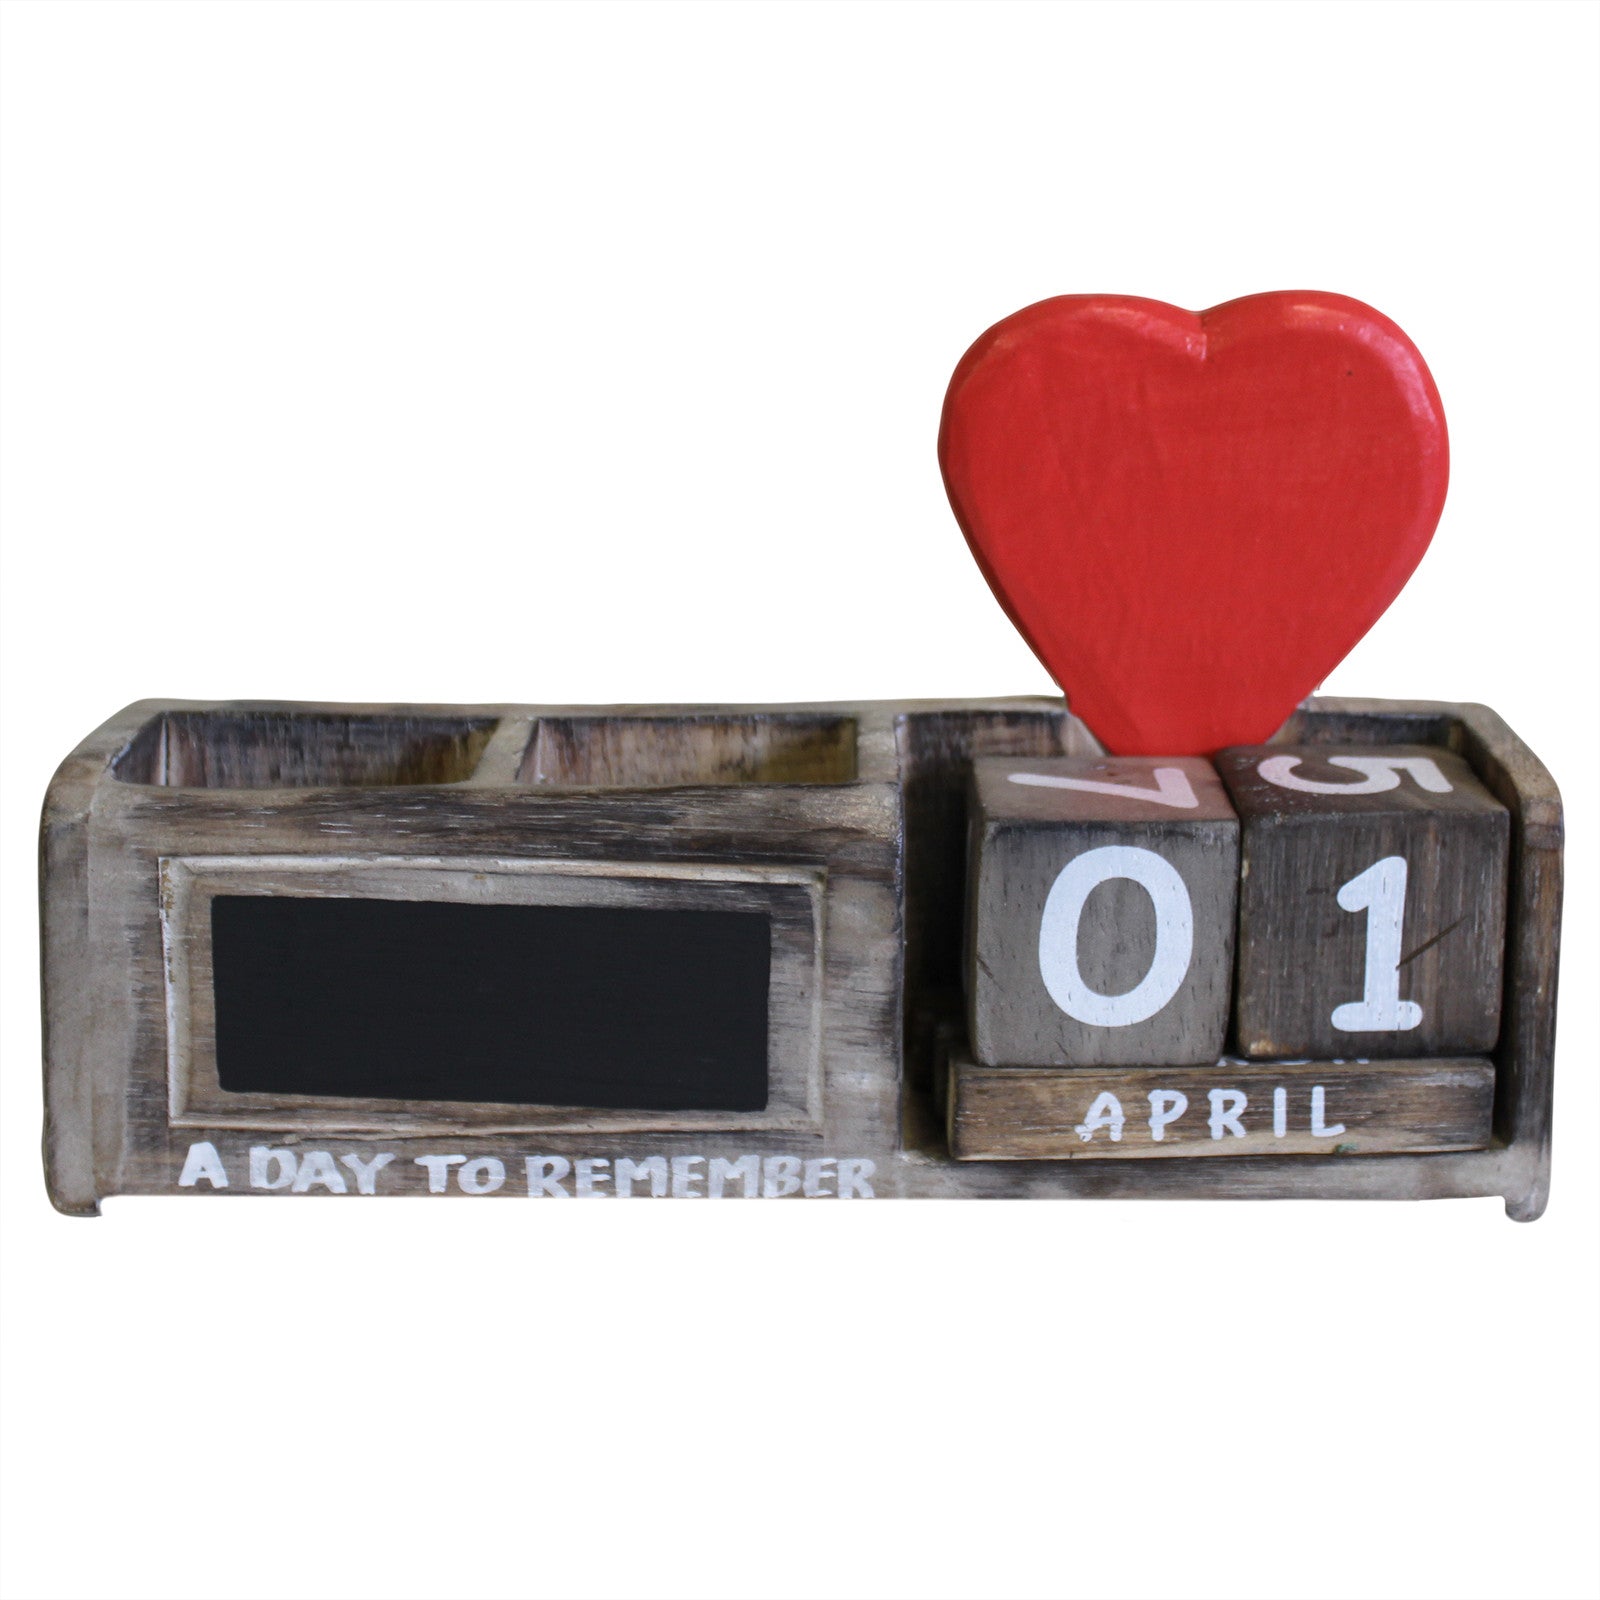 Day to Remember pen holder - Natural & Red Heart - Shopy Max